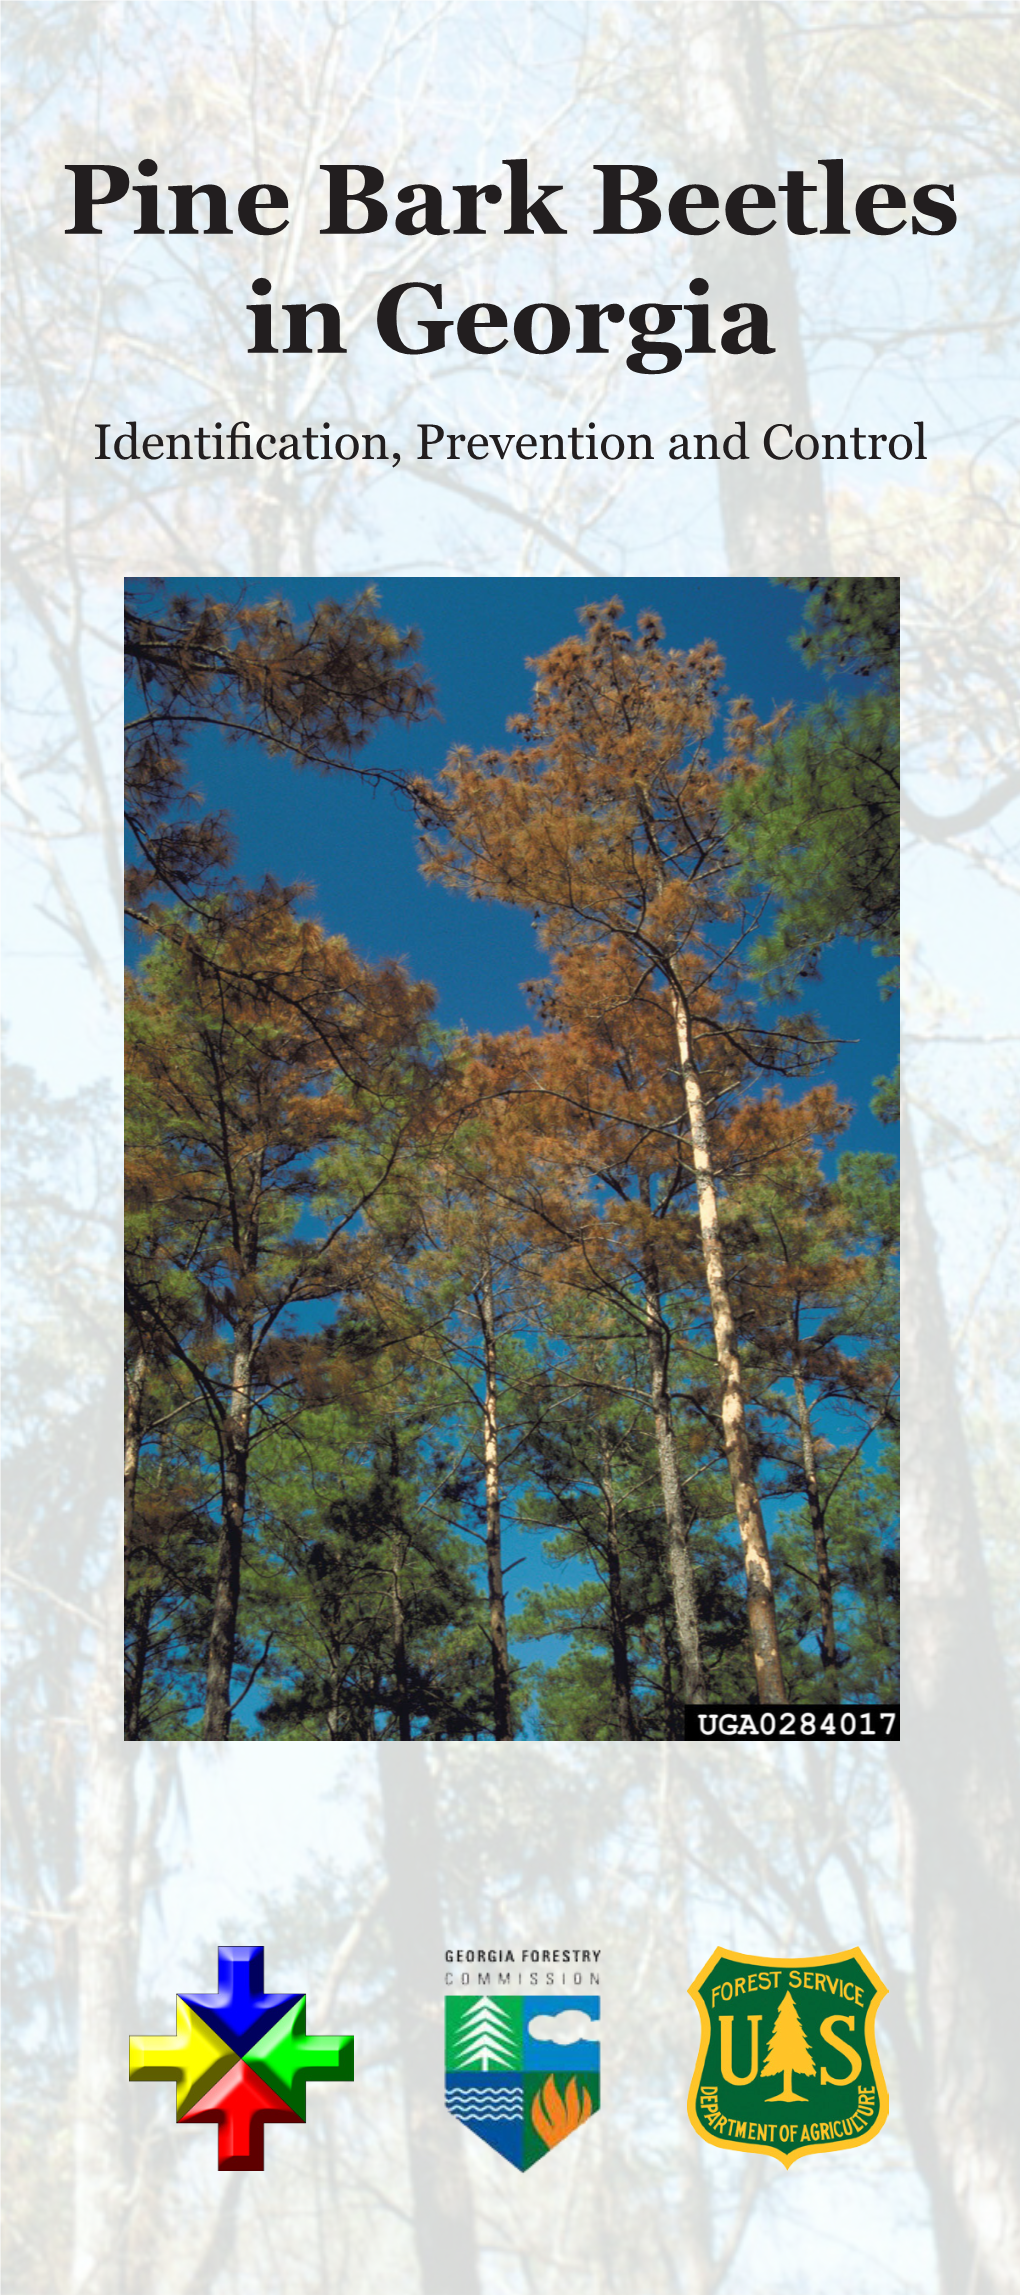 Pine Bark Beetles in Georgia Identification, Prevention and Control WHAT ARE PINE BARK BEETLES?